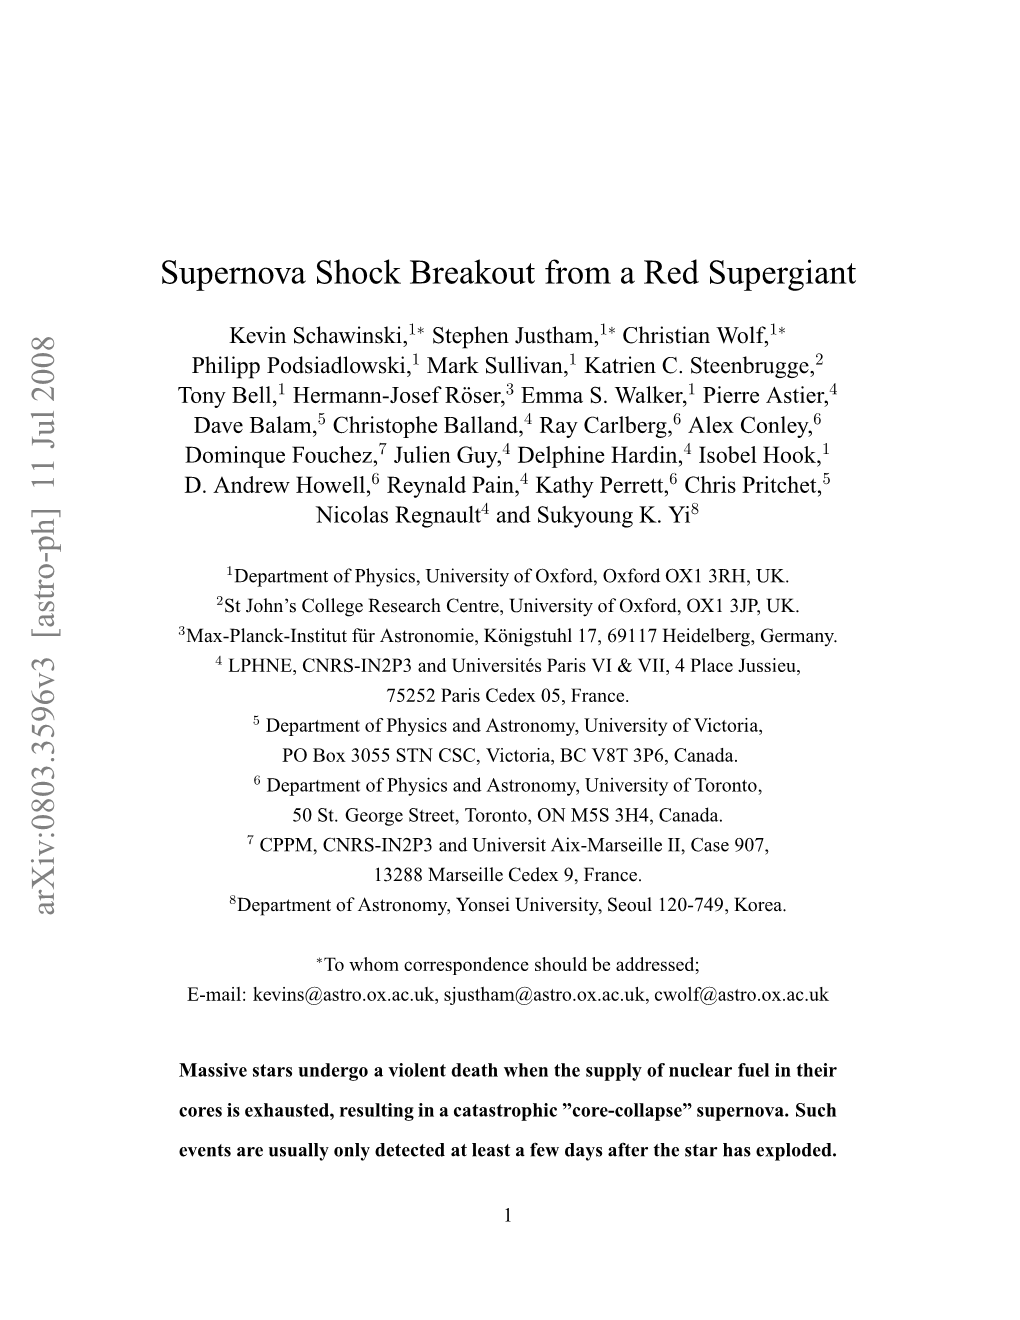 Supernova Shock Breakout from a Red Supergiant